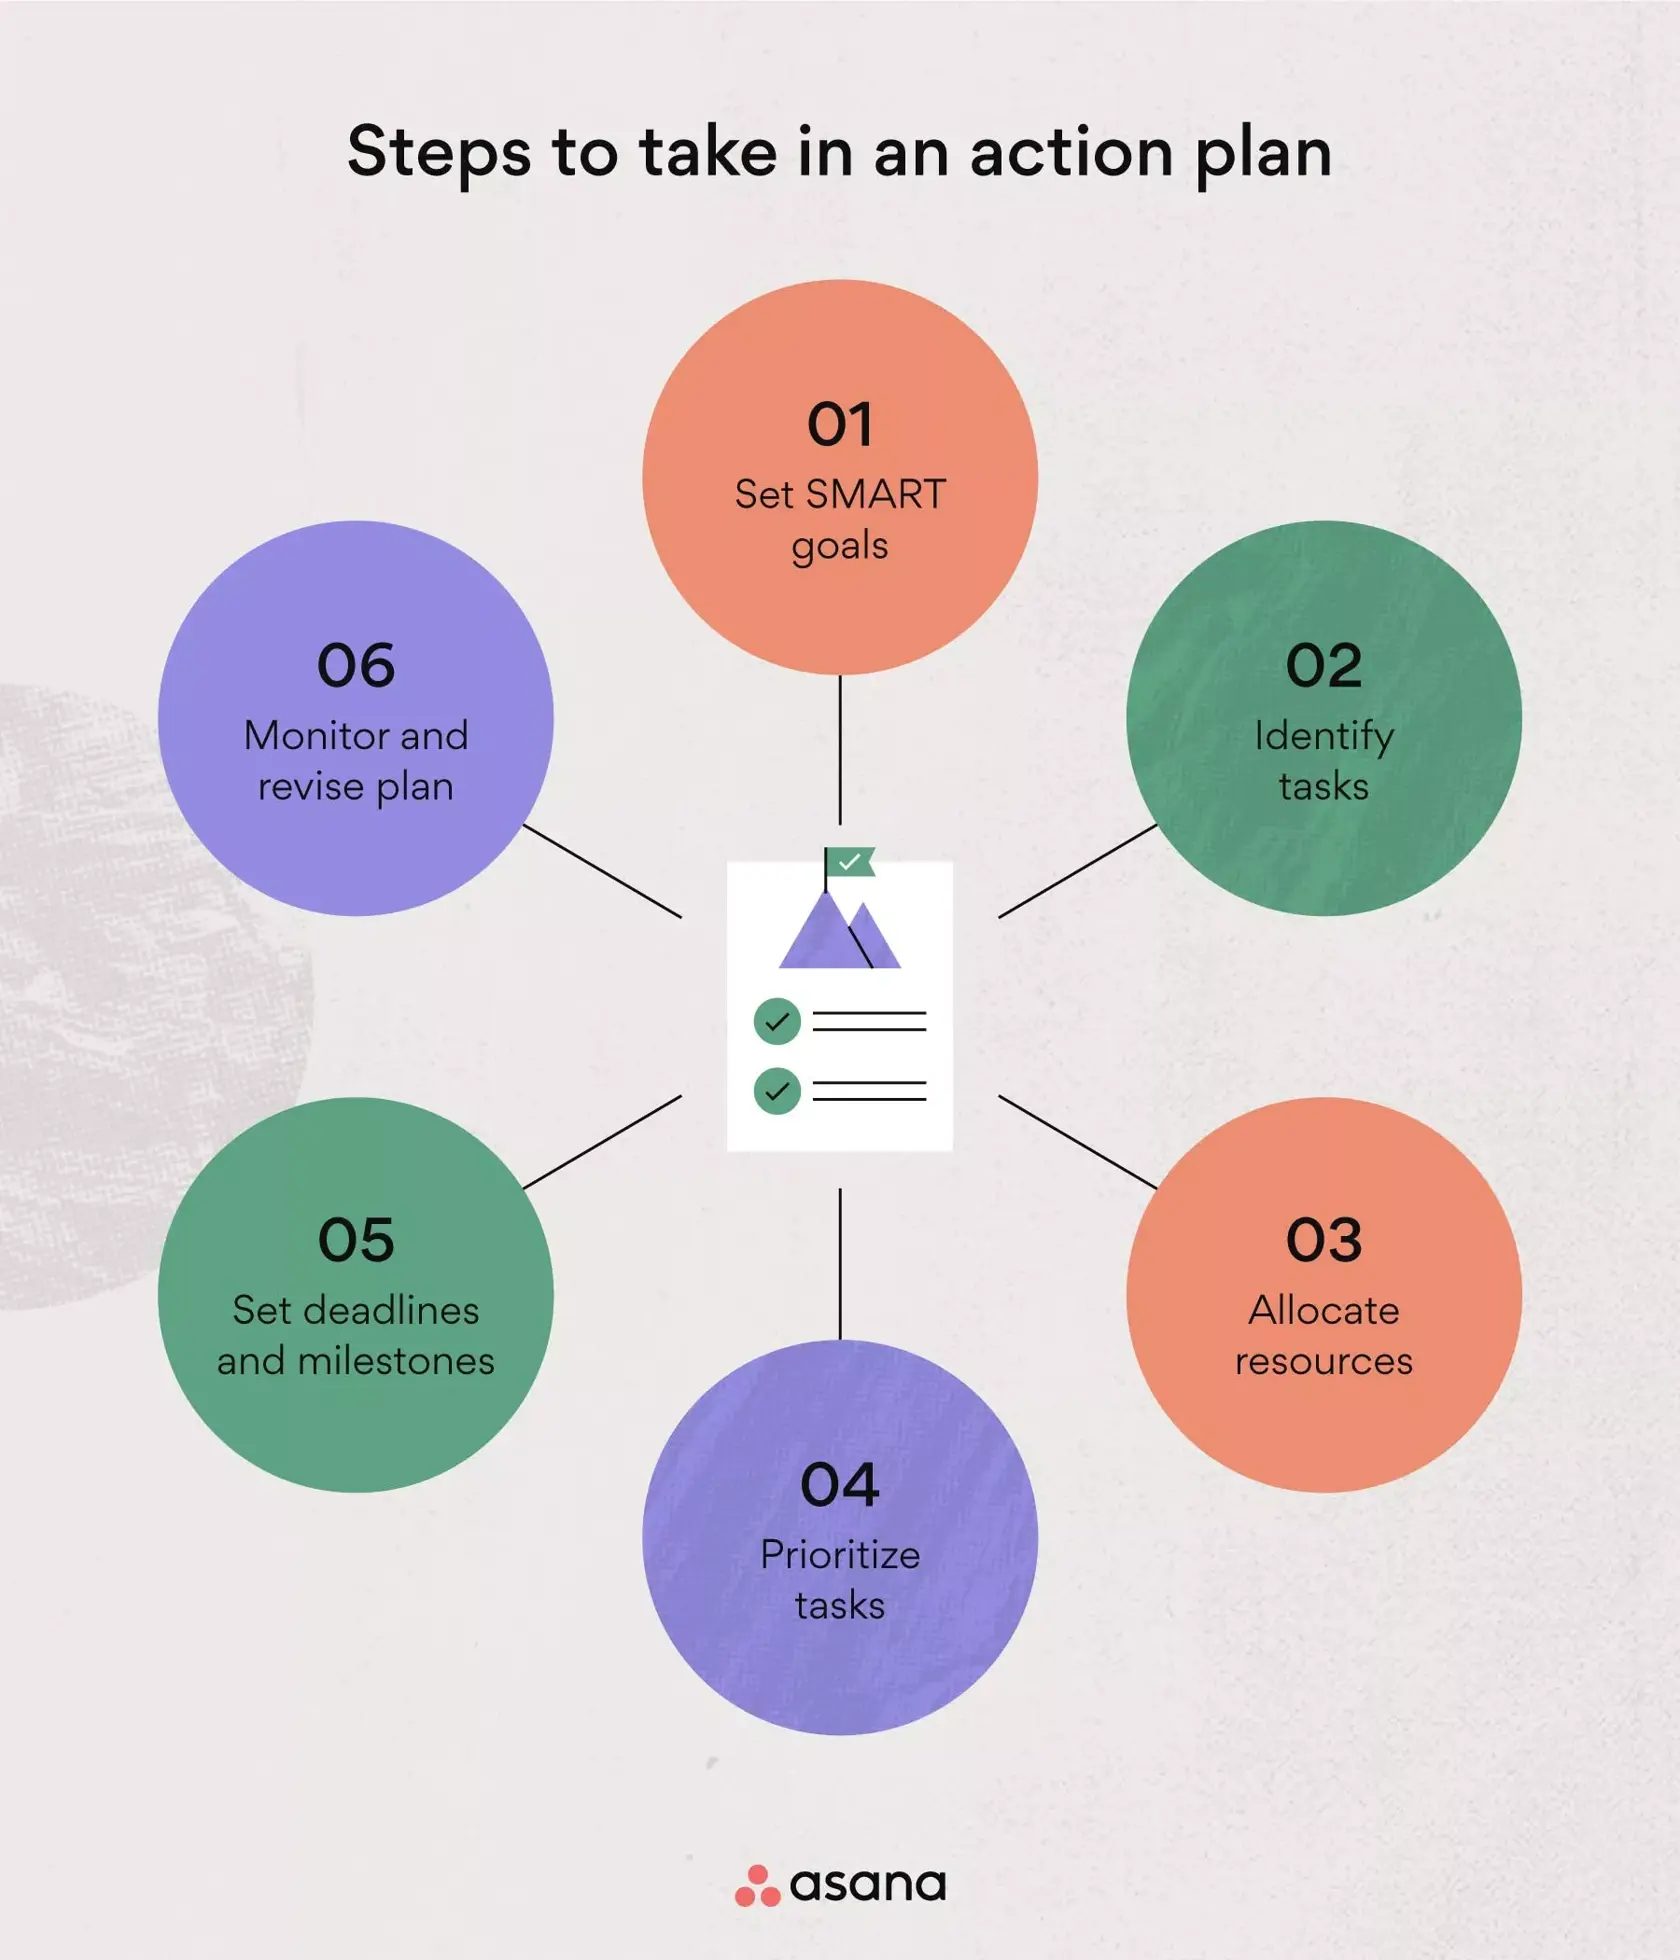 Who needs an action plan?